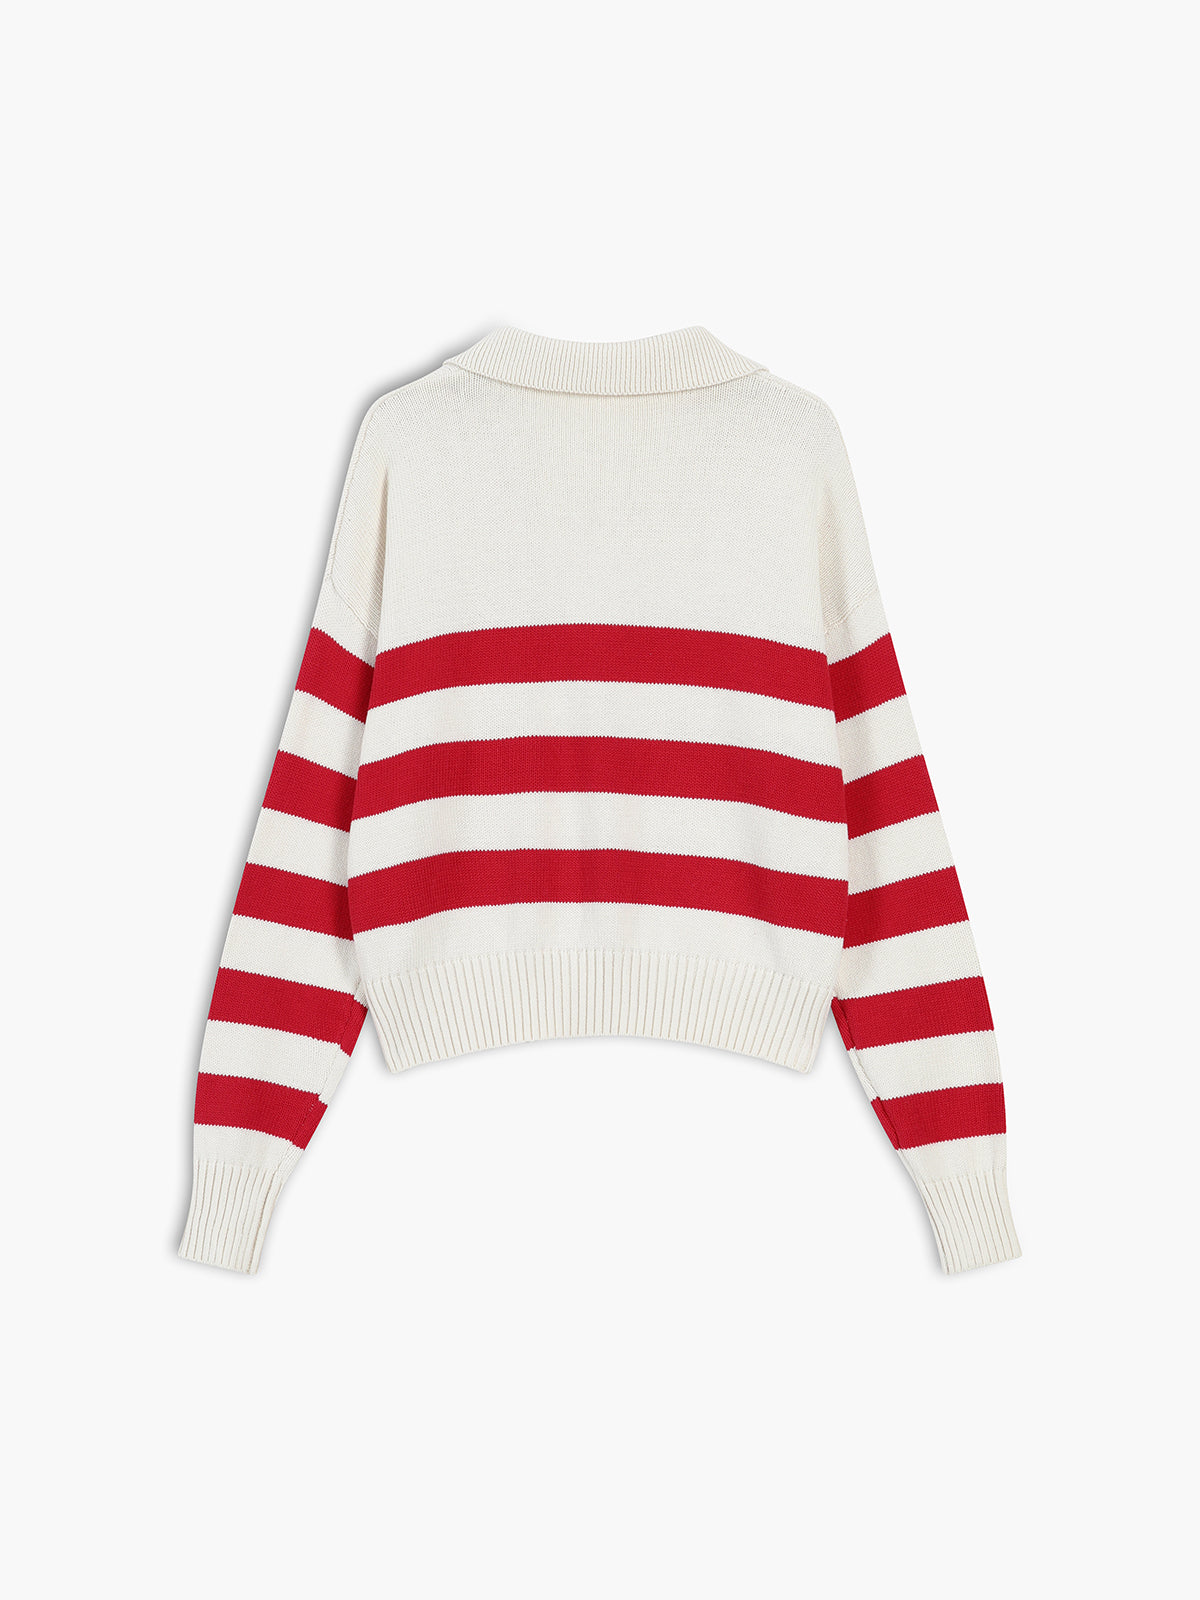 Running On Flames Stripe Knit Top